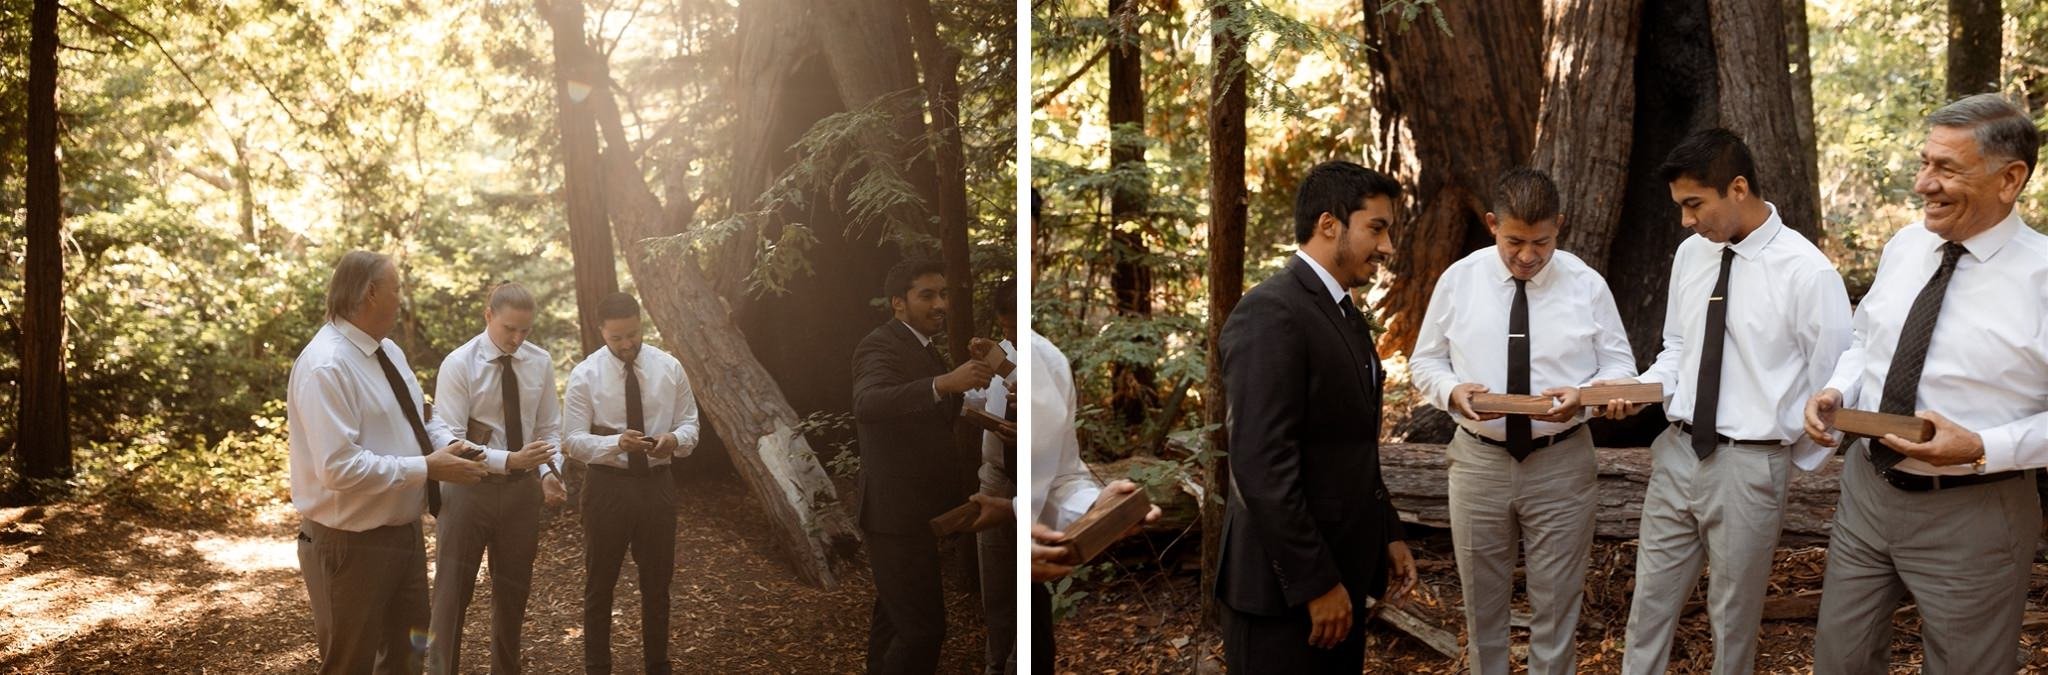 056_Two-Day Big Sur Redwoods Elopement with Family_Will Khoury Elopement Photographer.jpg